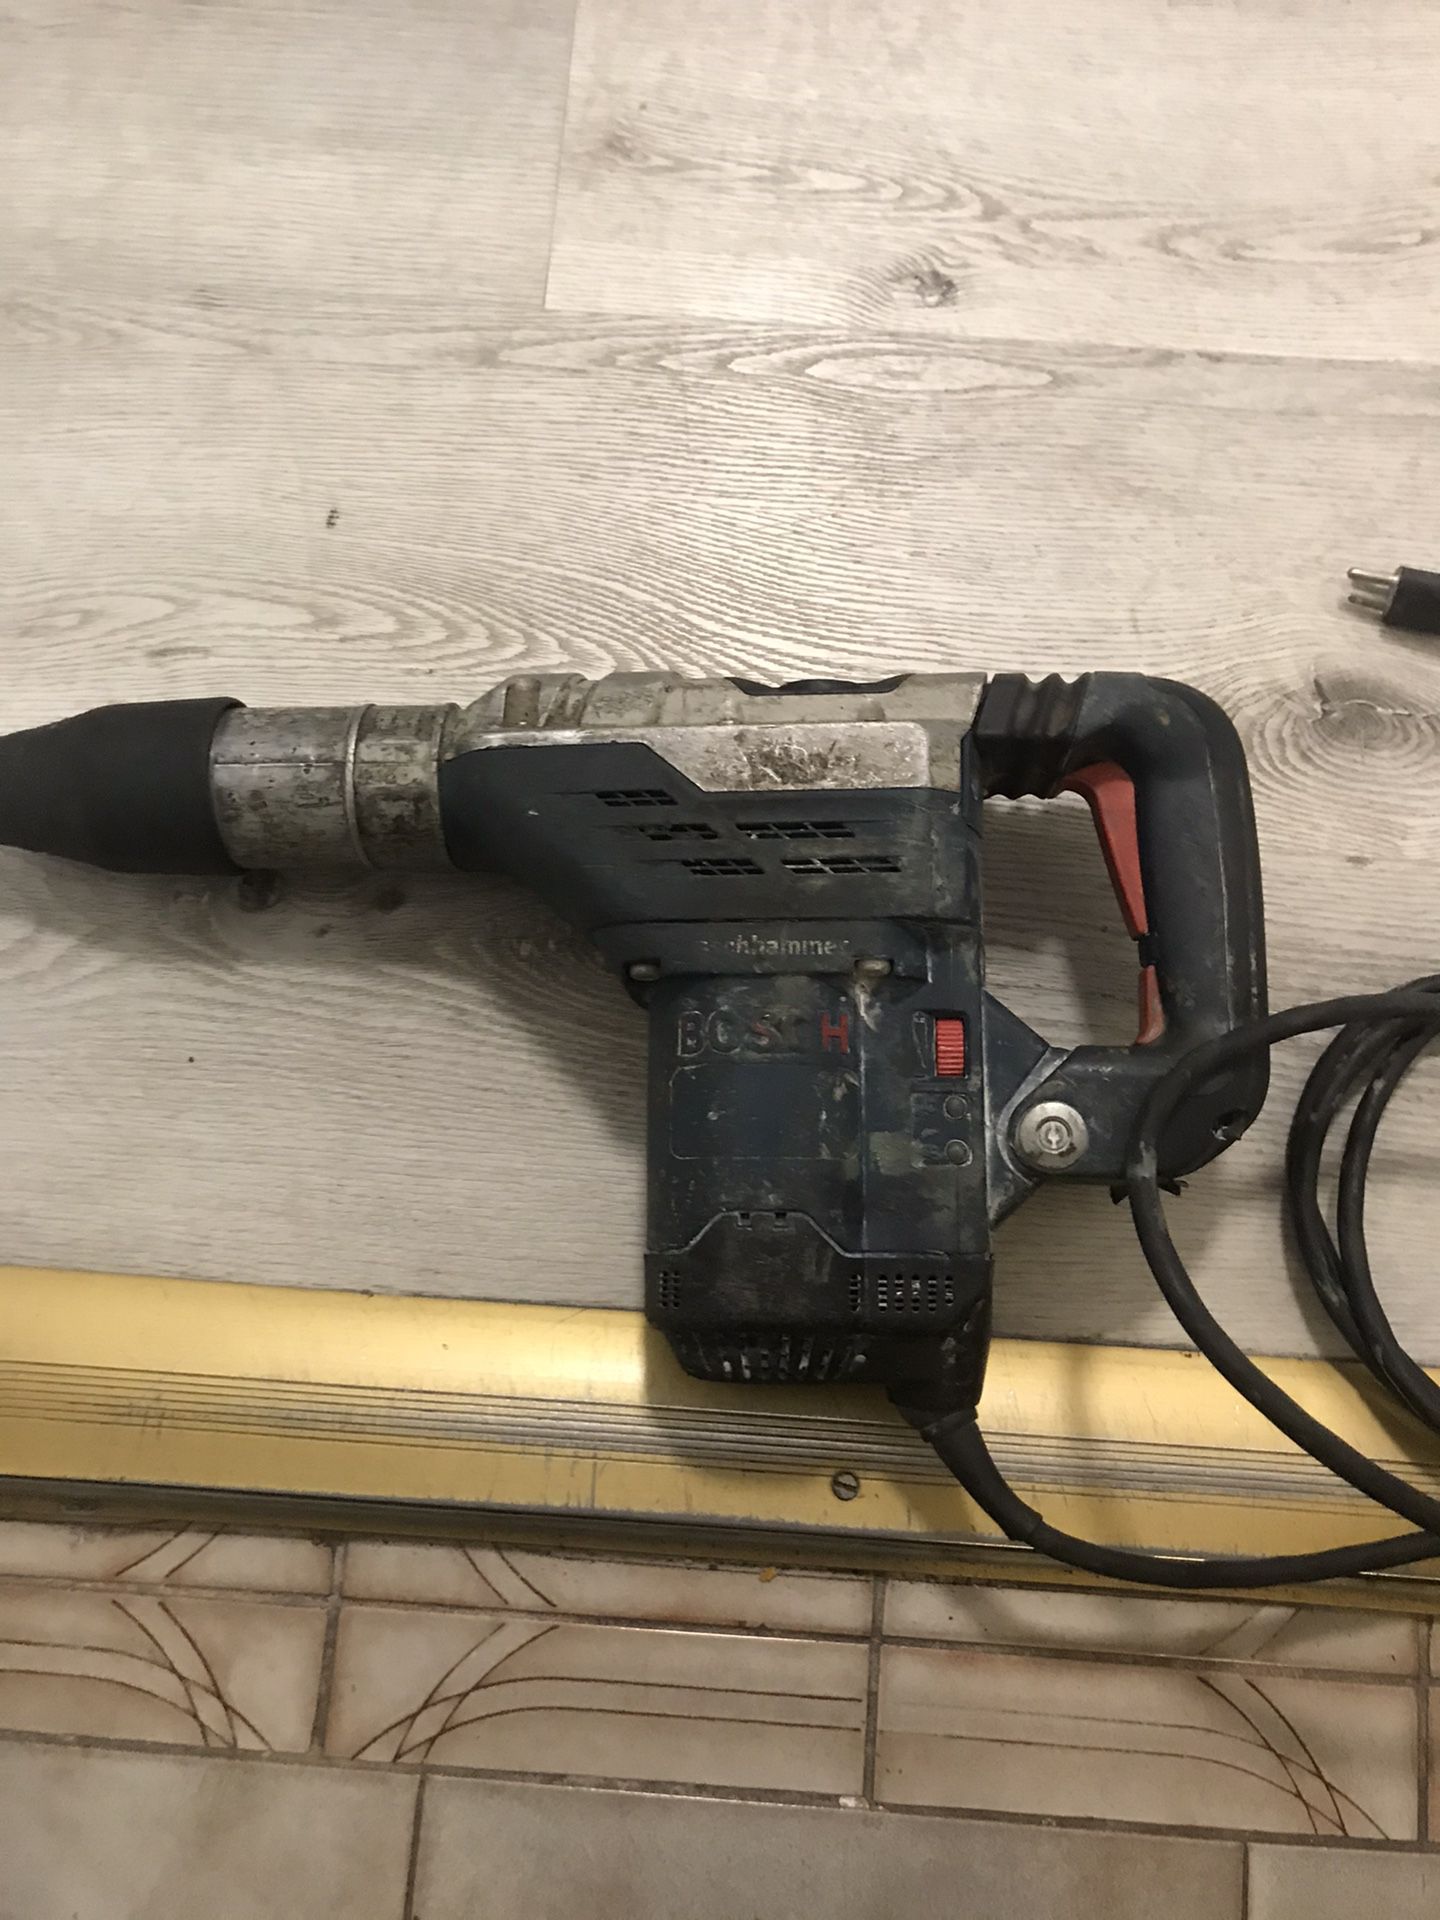 Bosch rotary hammer drill working perfect